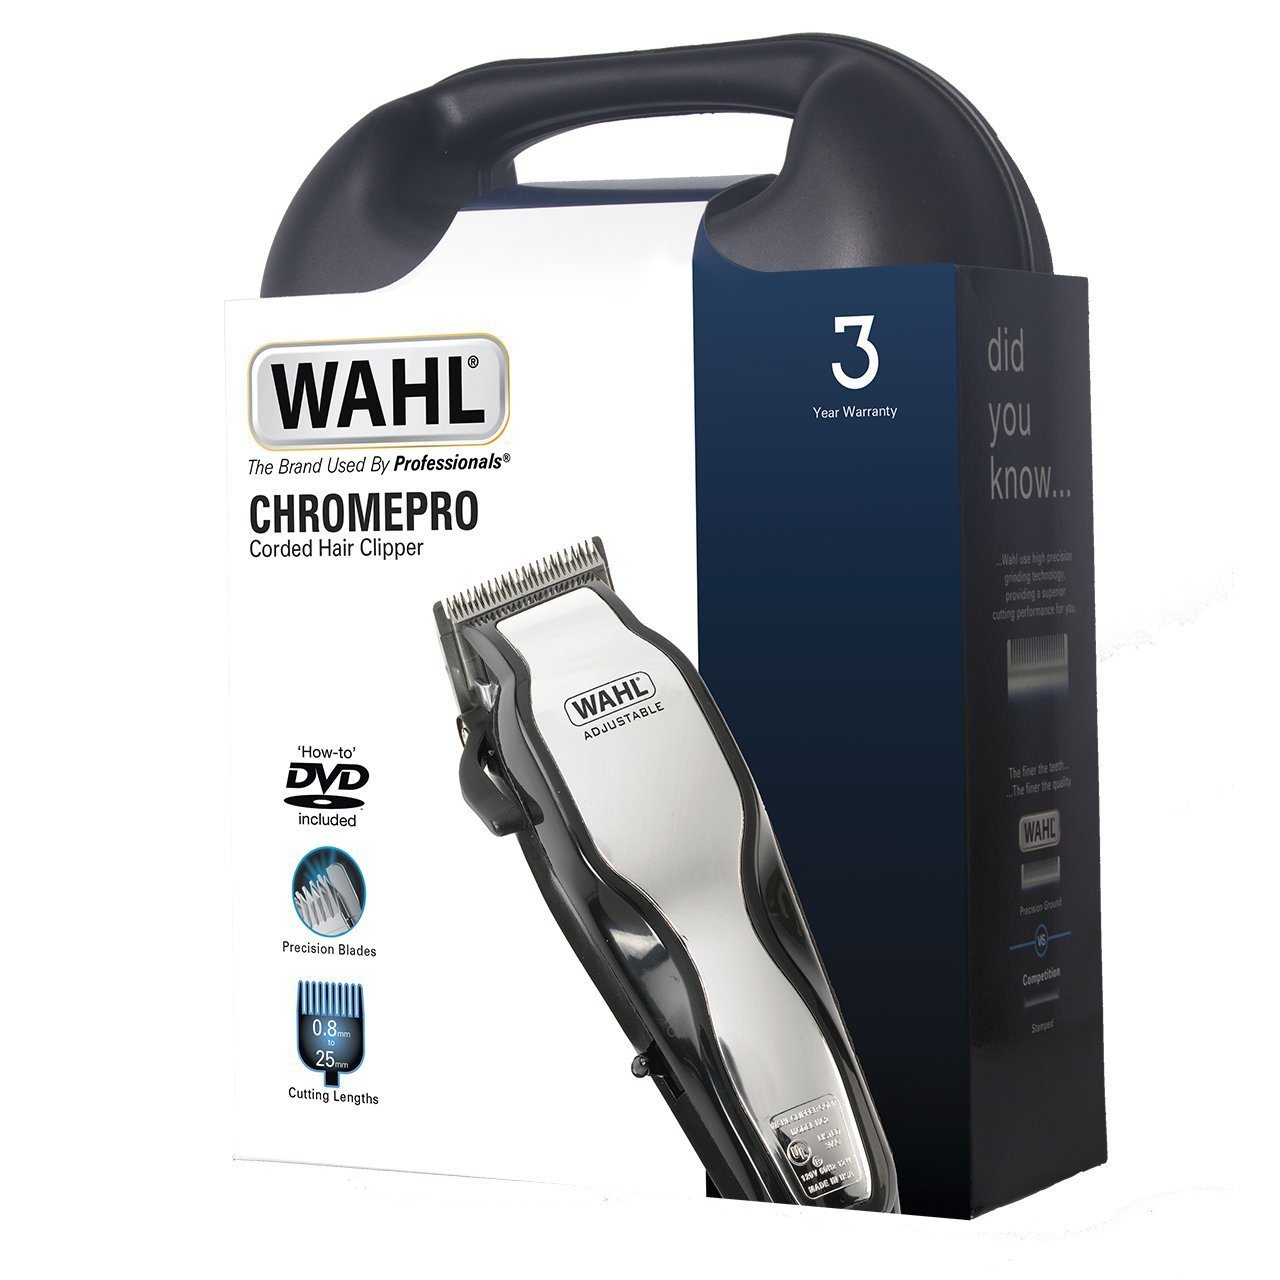 Wahl Chromepro Mains Clipper UK in the box